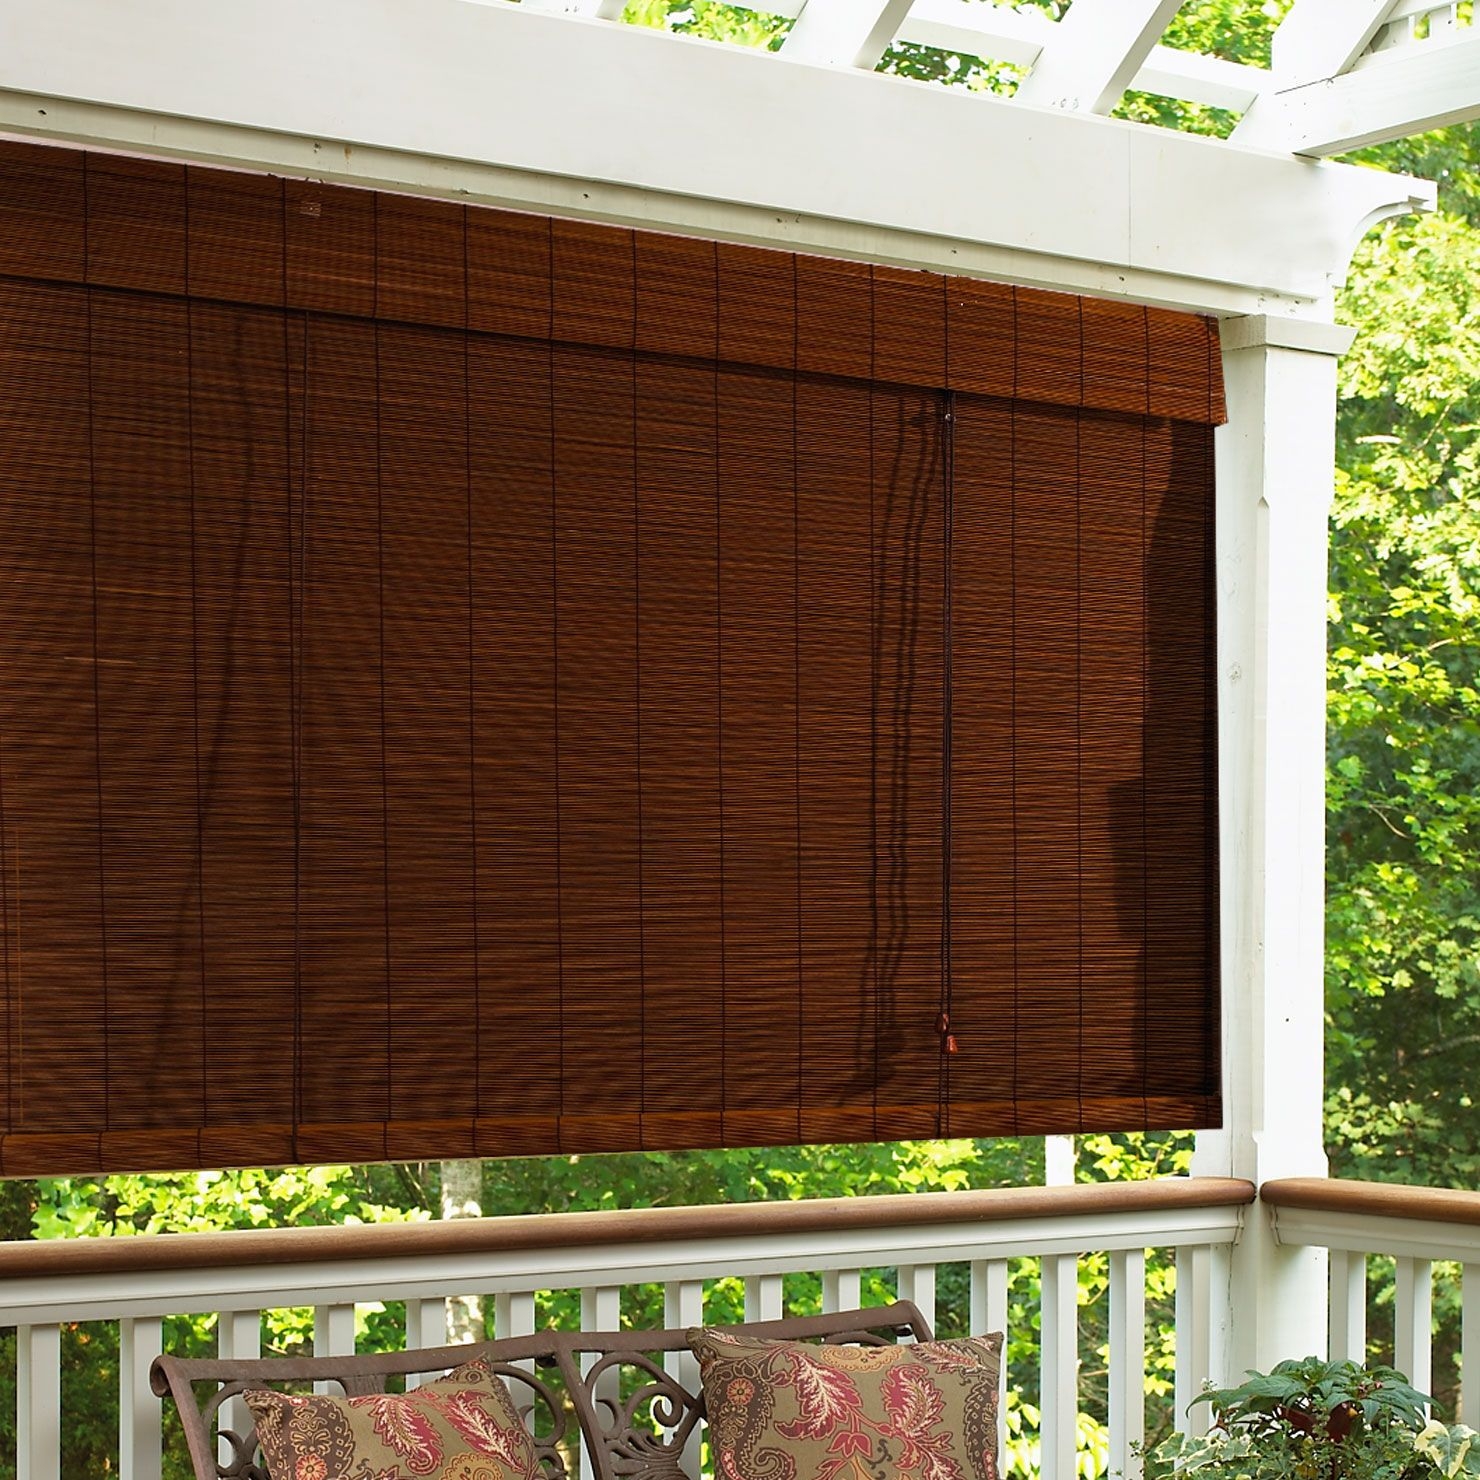 Natural Reed Curtain,Bamboo Blinds,Lifting Shutters,Bamboo Sun Shade Outdoor Indoor Blinds Decoration,120x120cm/48x48in Breathable and Anti-UV,Easy Installation and Customizable